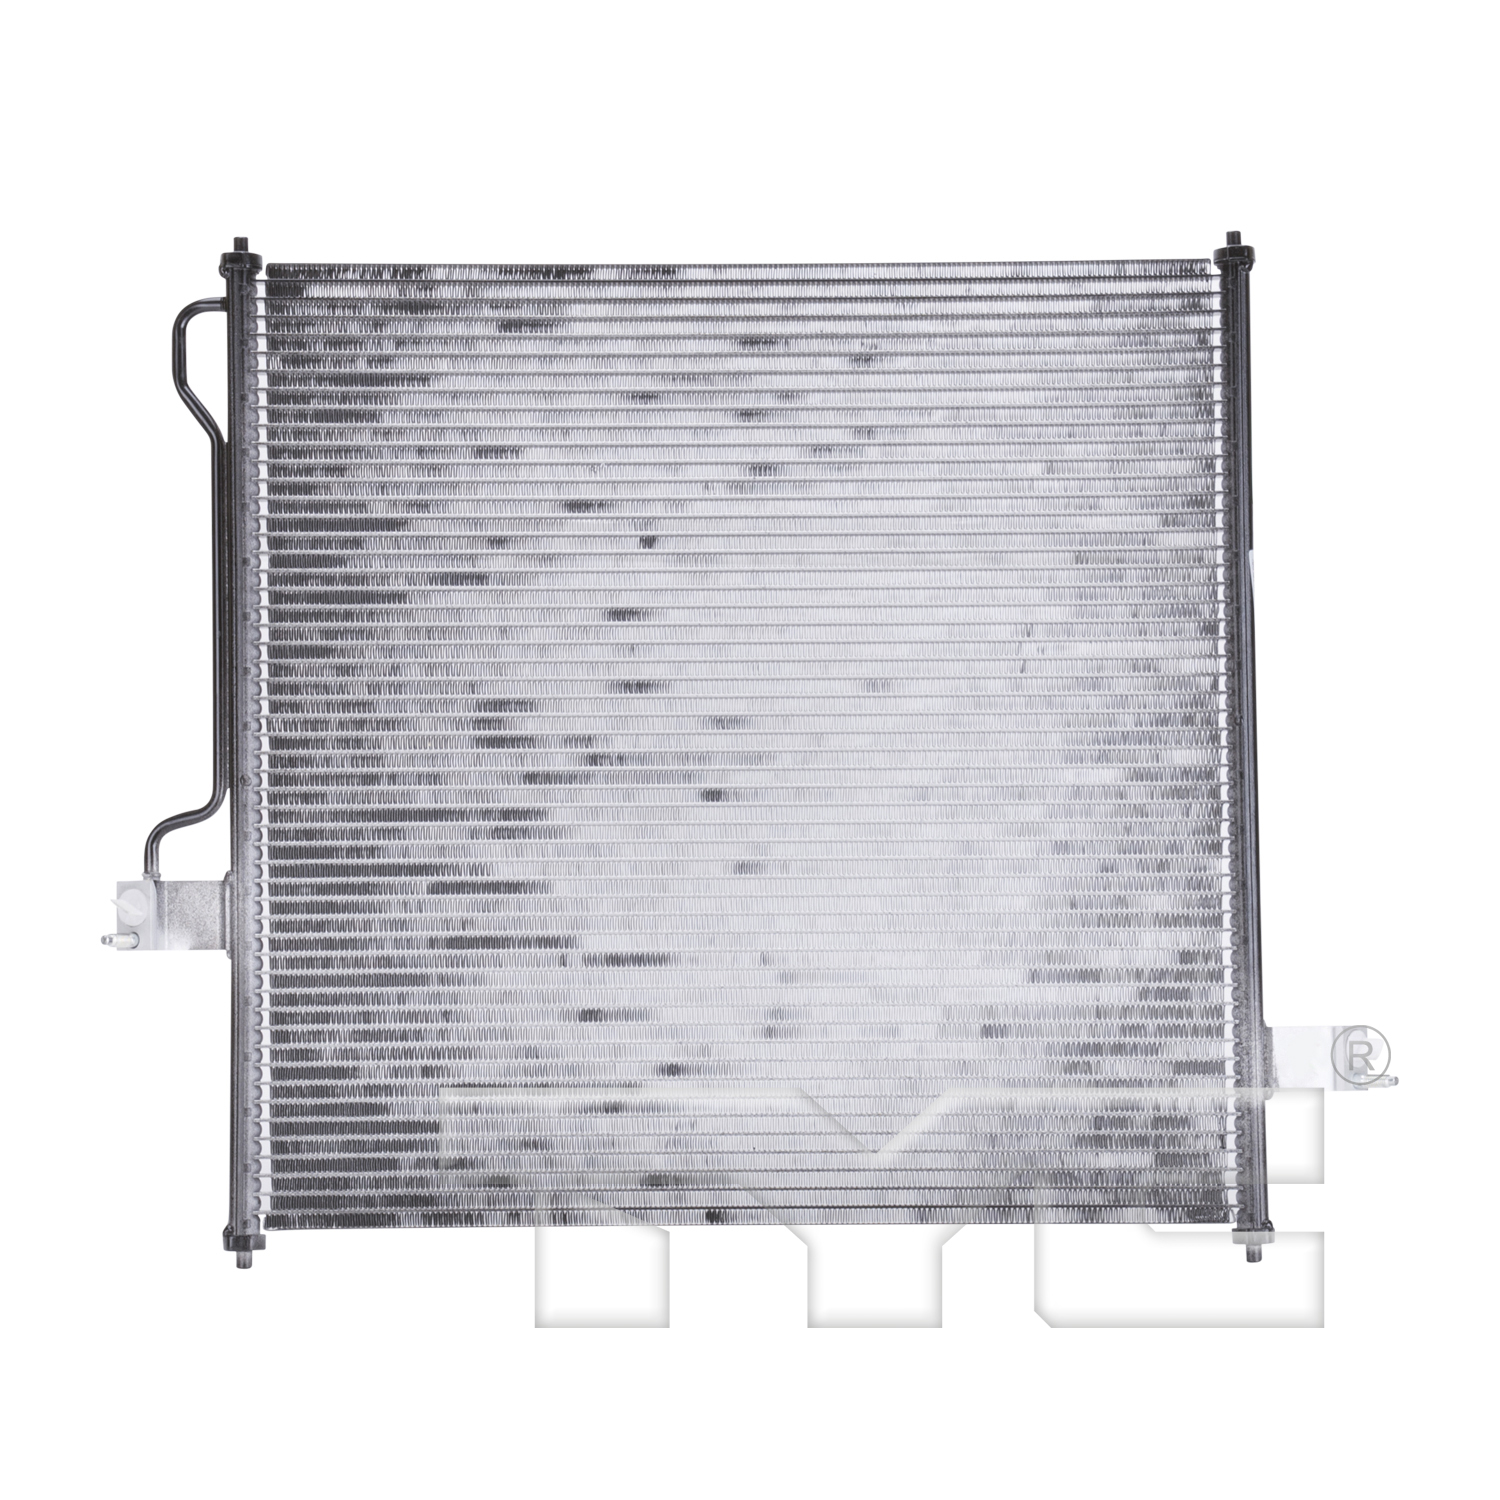 Aftermarket AC CONDENSERS for MERCURY - MOUNTAINEER, MOUNTAINEER,02-05,Air conditioning condenser